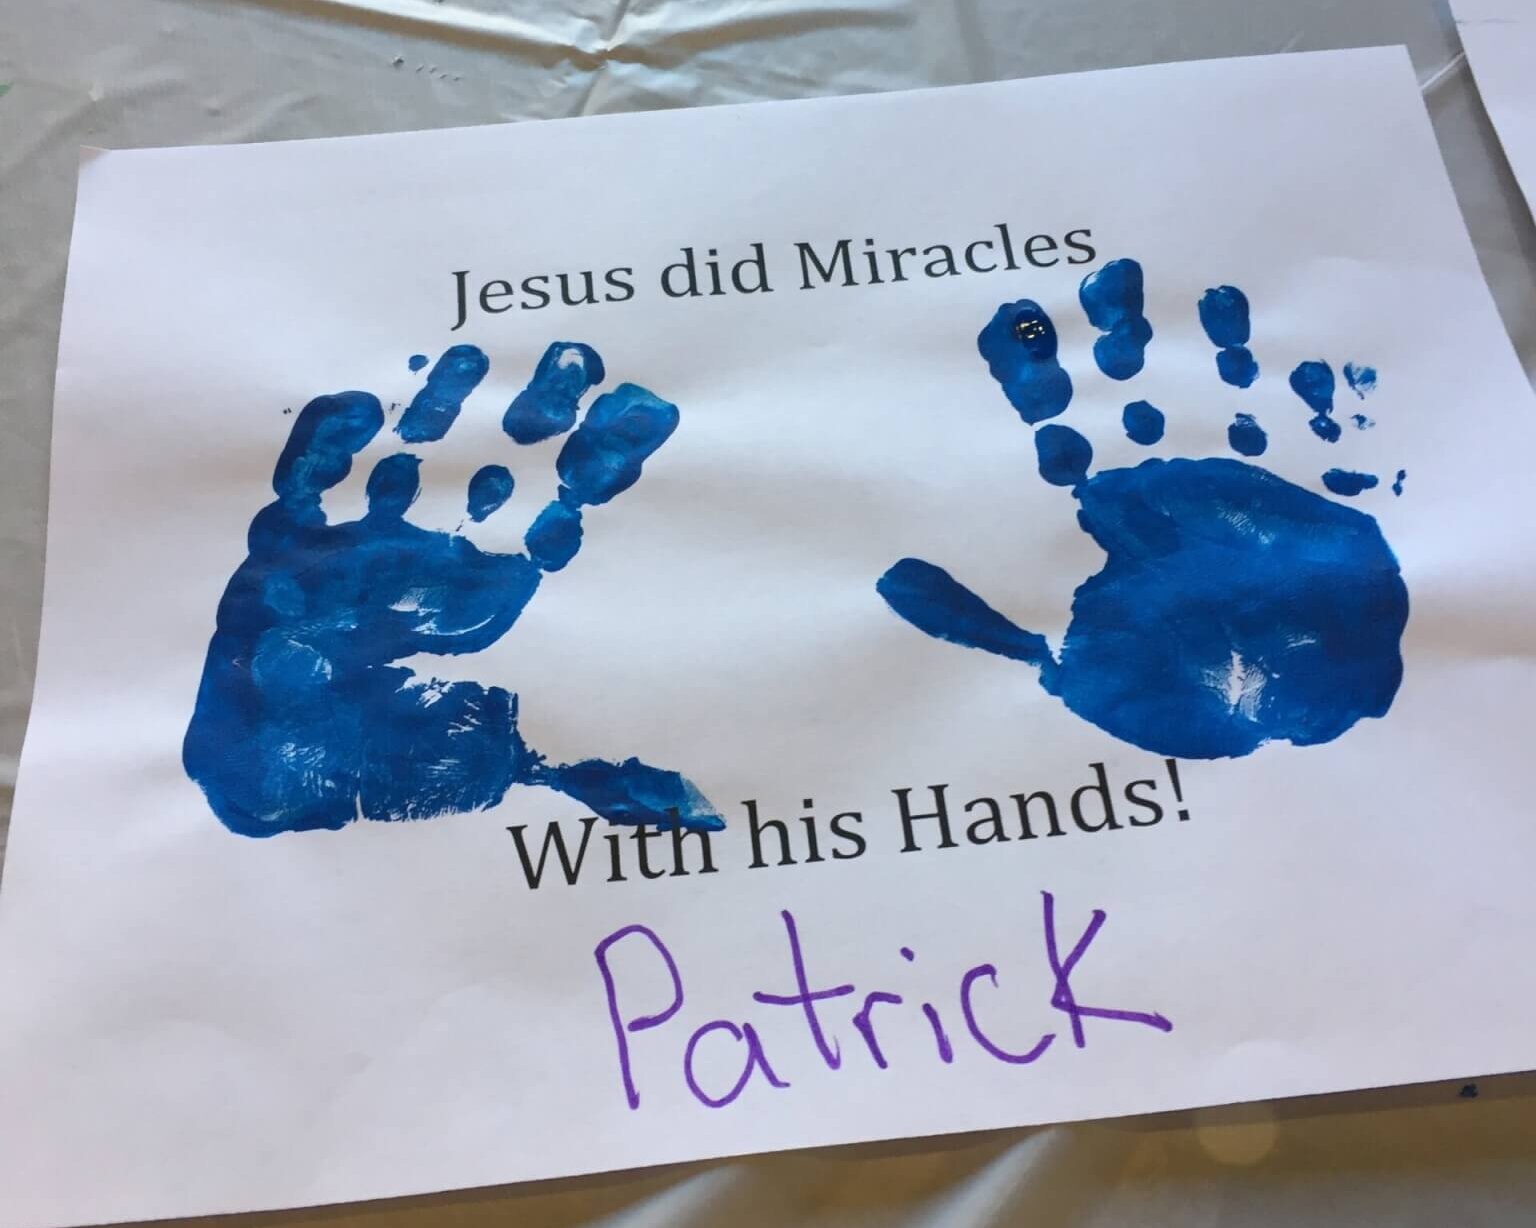 Jesus did Miracles with his Hands; blue handprints on sign